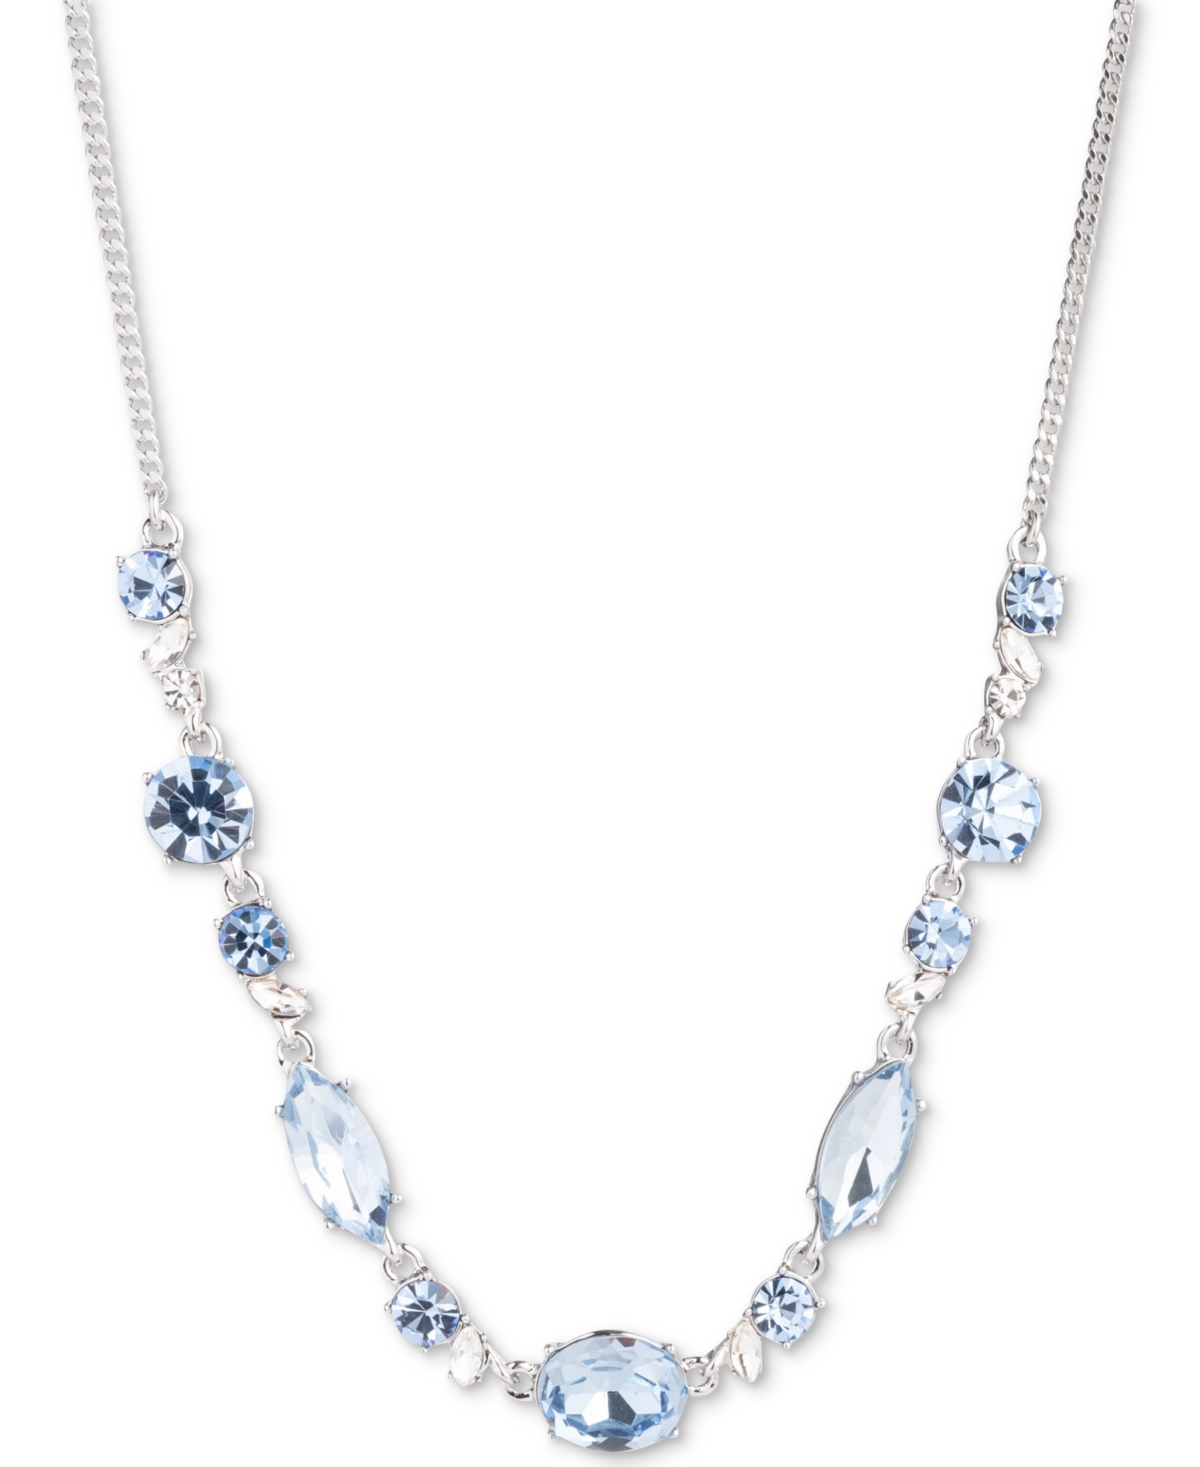 Givenchy Crystal Frontal Necklace, 16" + 3" Extender In Blue